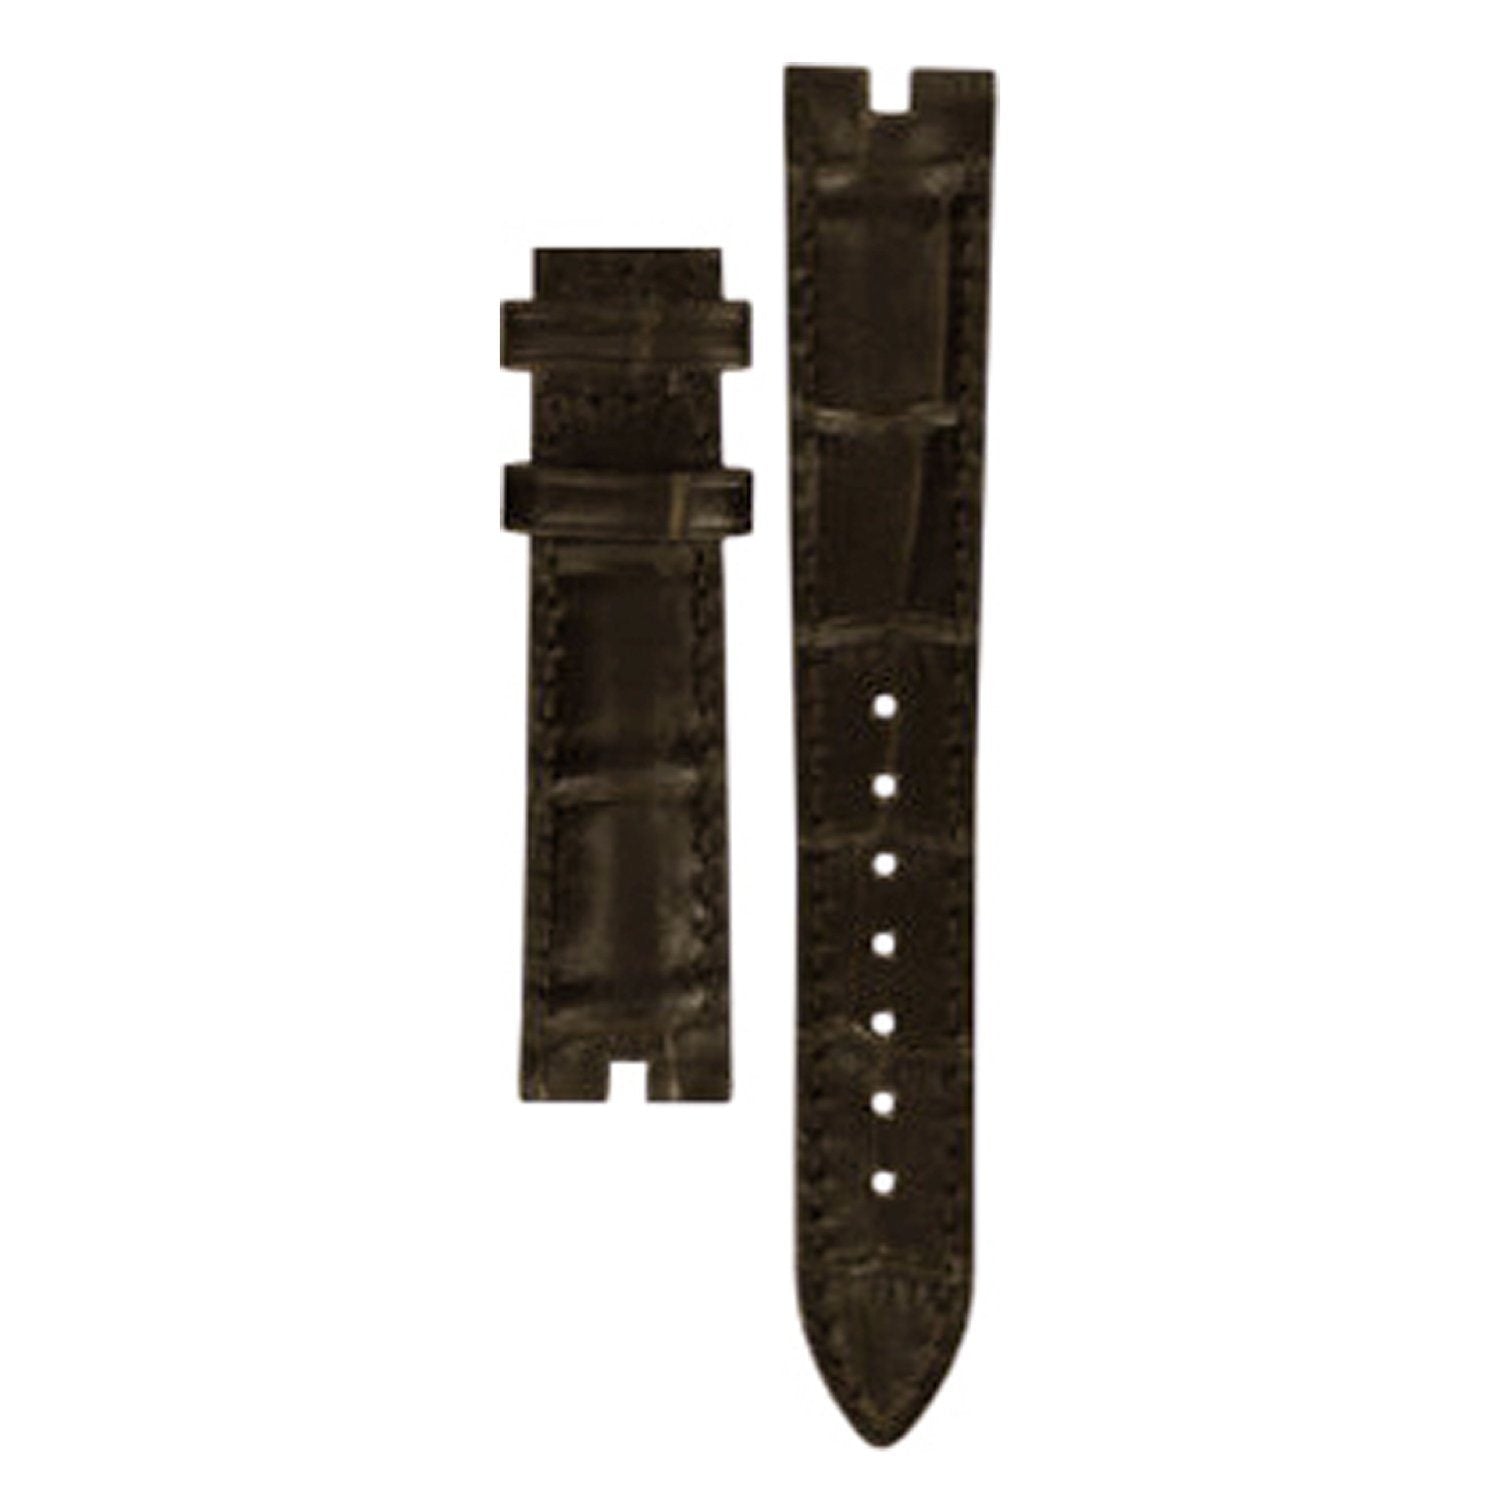 Genuine Tissot 16mm Pretty Brown Leather Strap without Buckle by Tissot